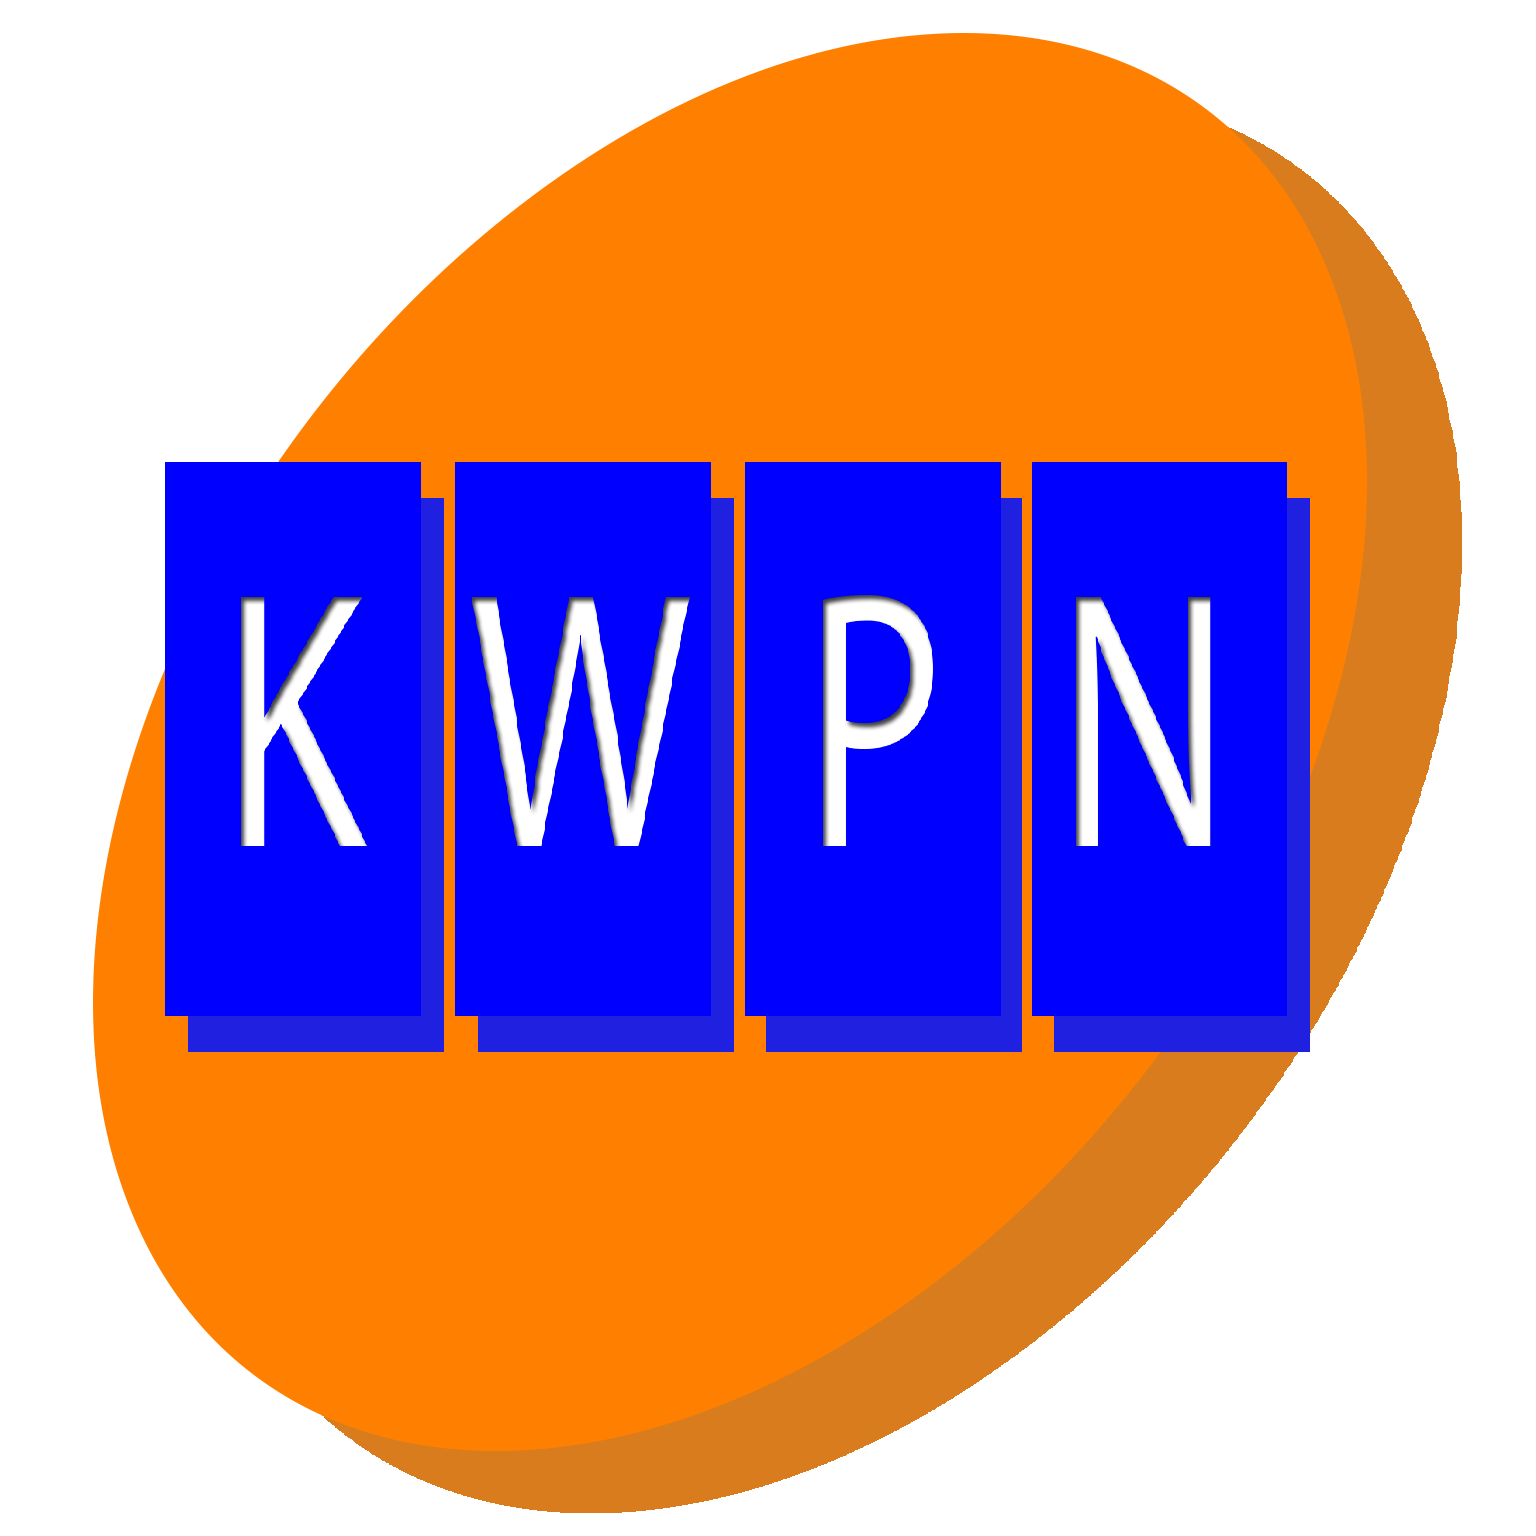 Ep 24: KWPN News at night for August 20, 2020